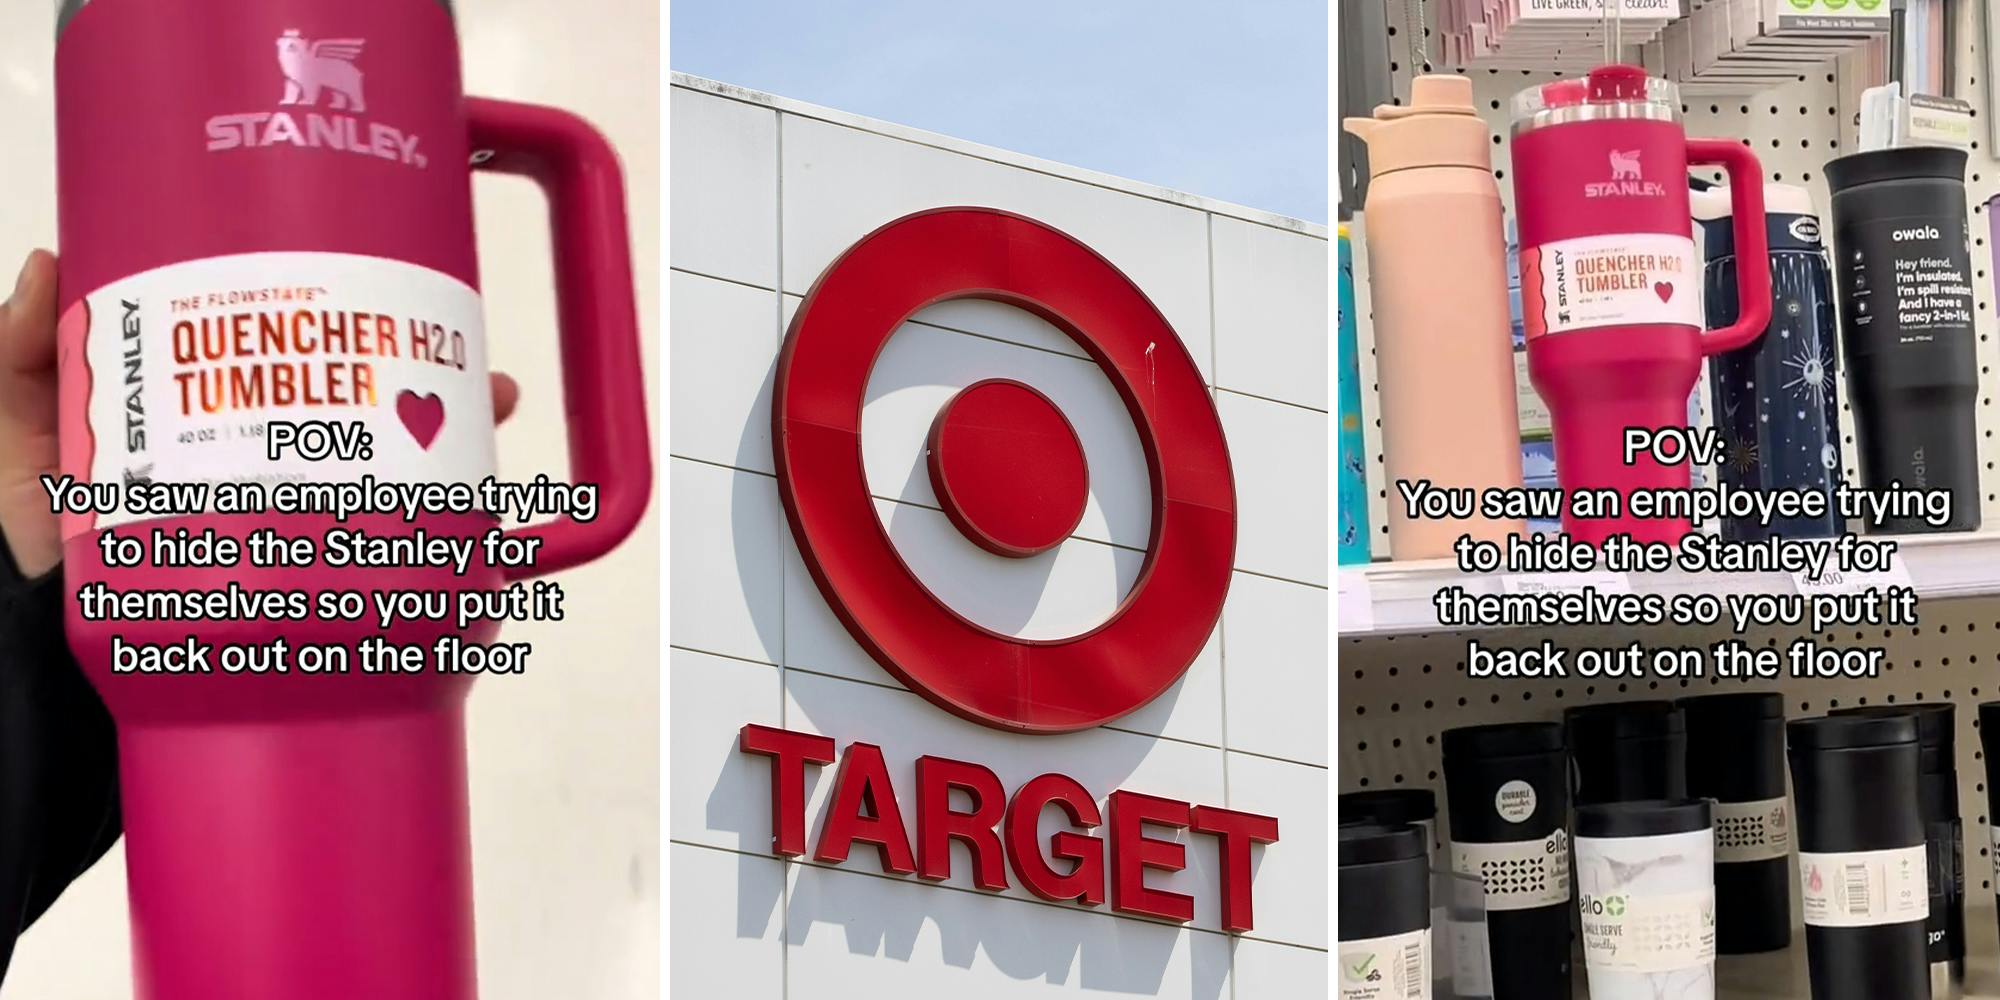 Target is firing their workers for purchasing 'limited edition